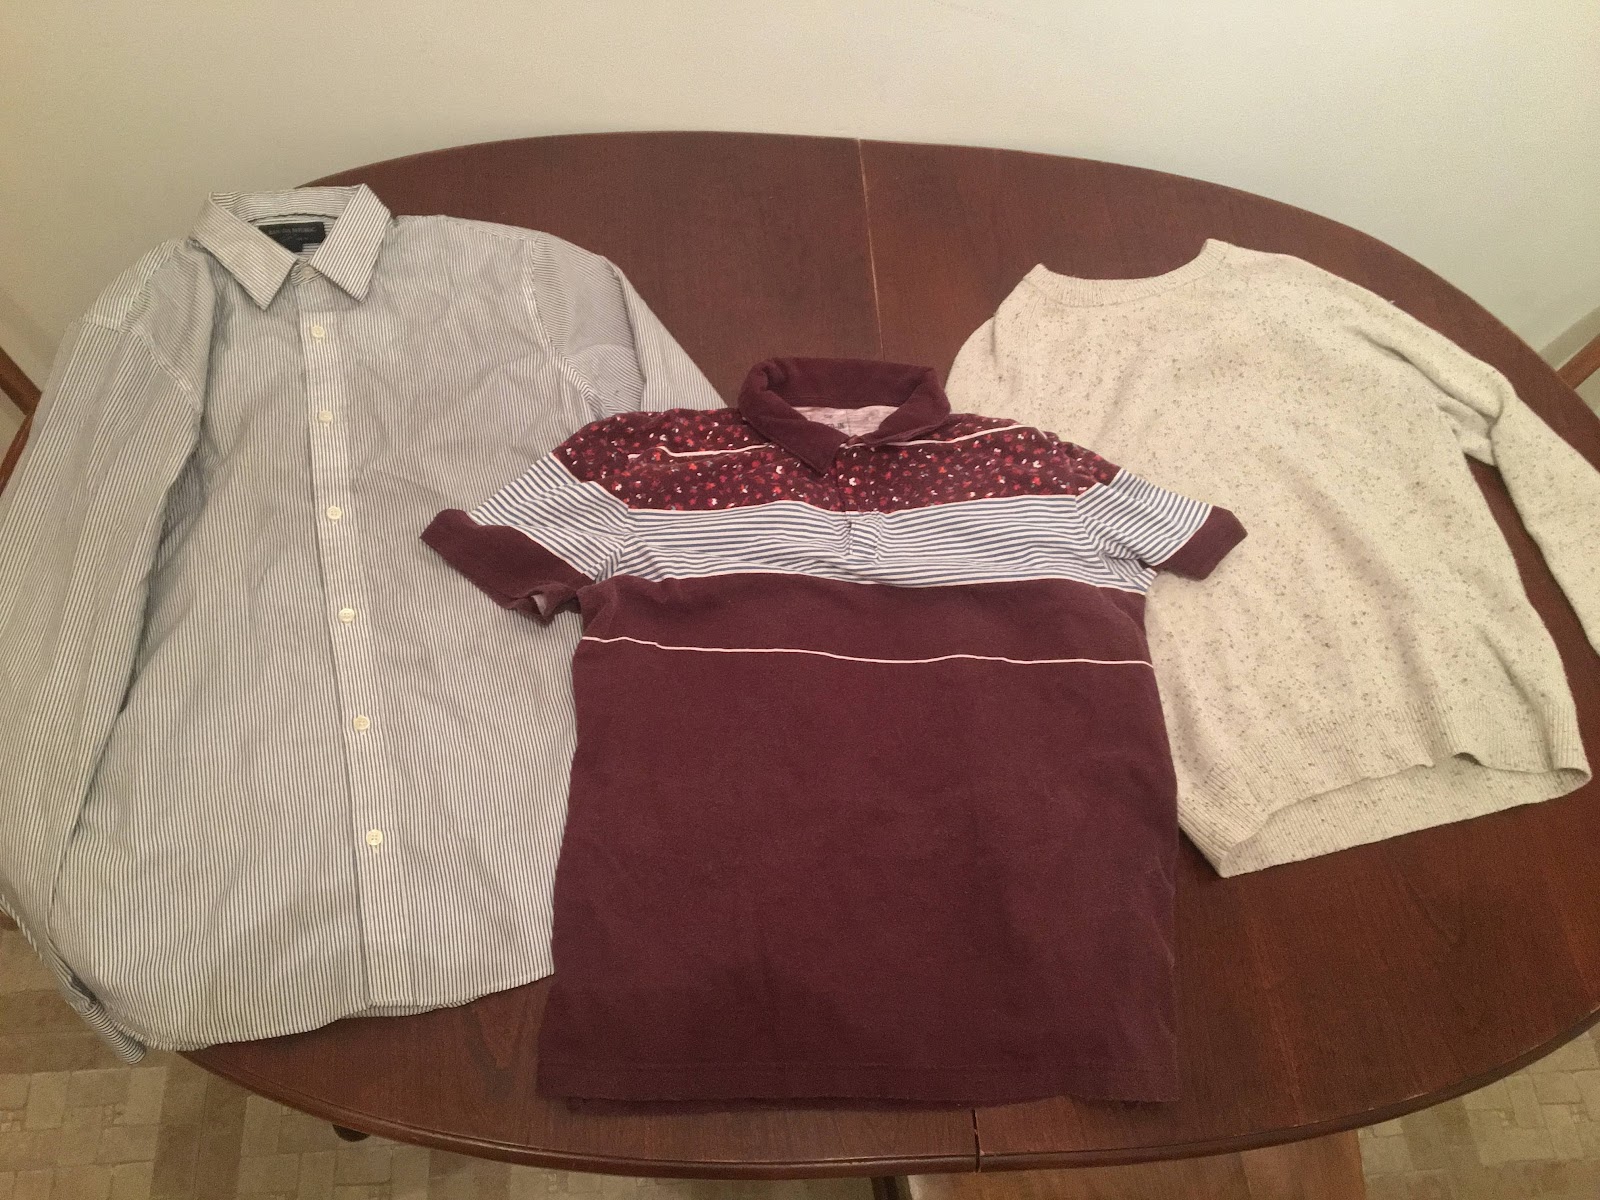 3 shirts, the one on the right was converted to money